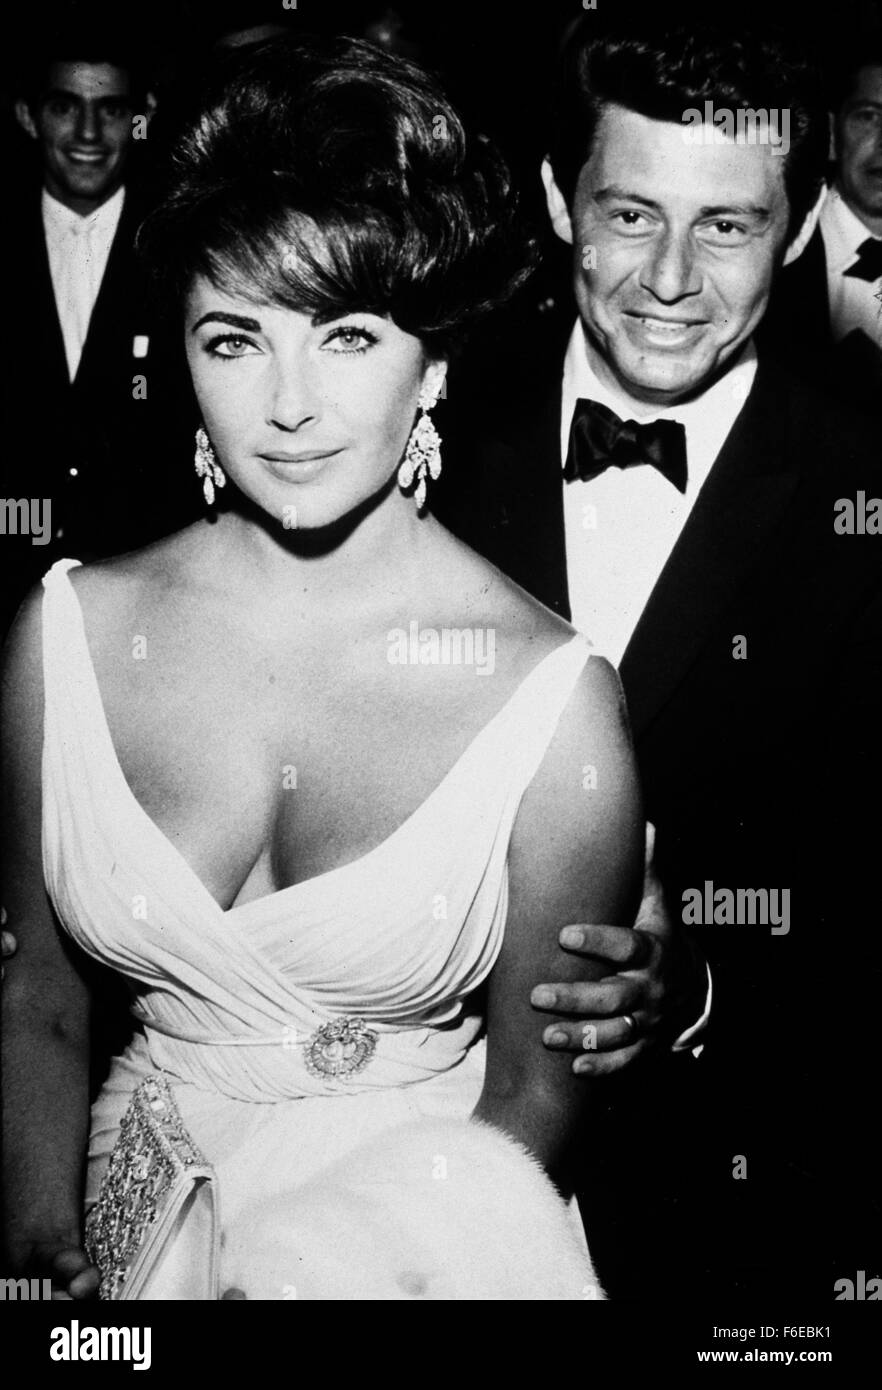 June 15, 1960 - FILM STILLS OF 1960, ACADEMY AWARDS CEREMONIES, EDDIE FISHER, HUSBAND & WIFE, MARRIED COUPLES, ELIZABETH TAYLOR, HUSBANDS, LIZ TAYLOR, EARRING, JEWELLERY, JEWELRY, CLEAVAGE IN 1960..VARIOUS. Stock Photo